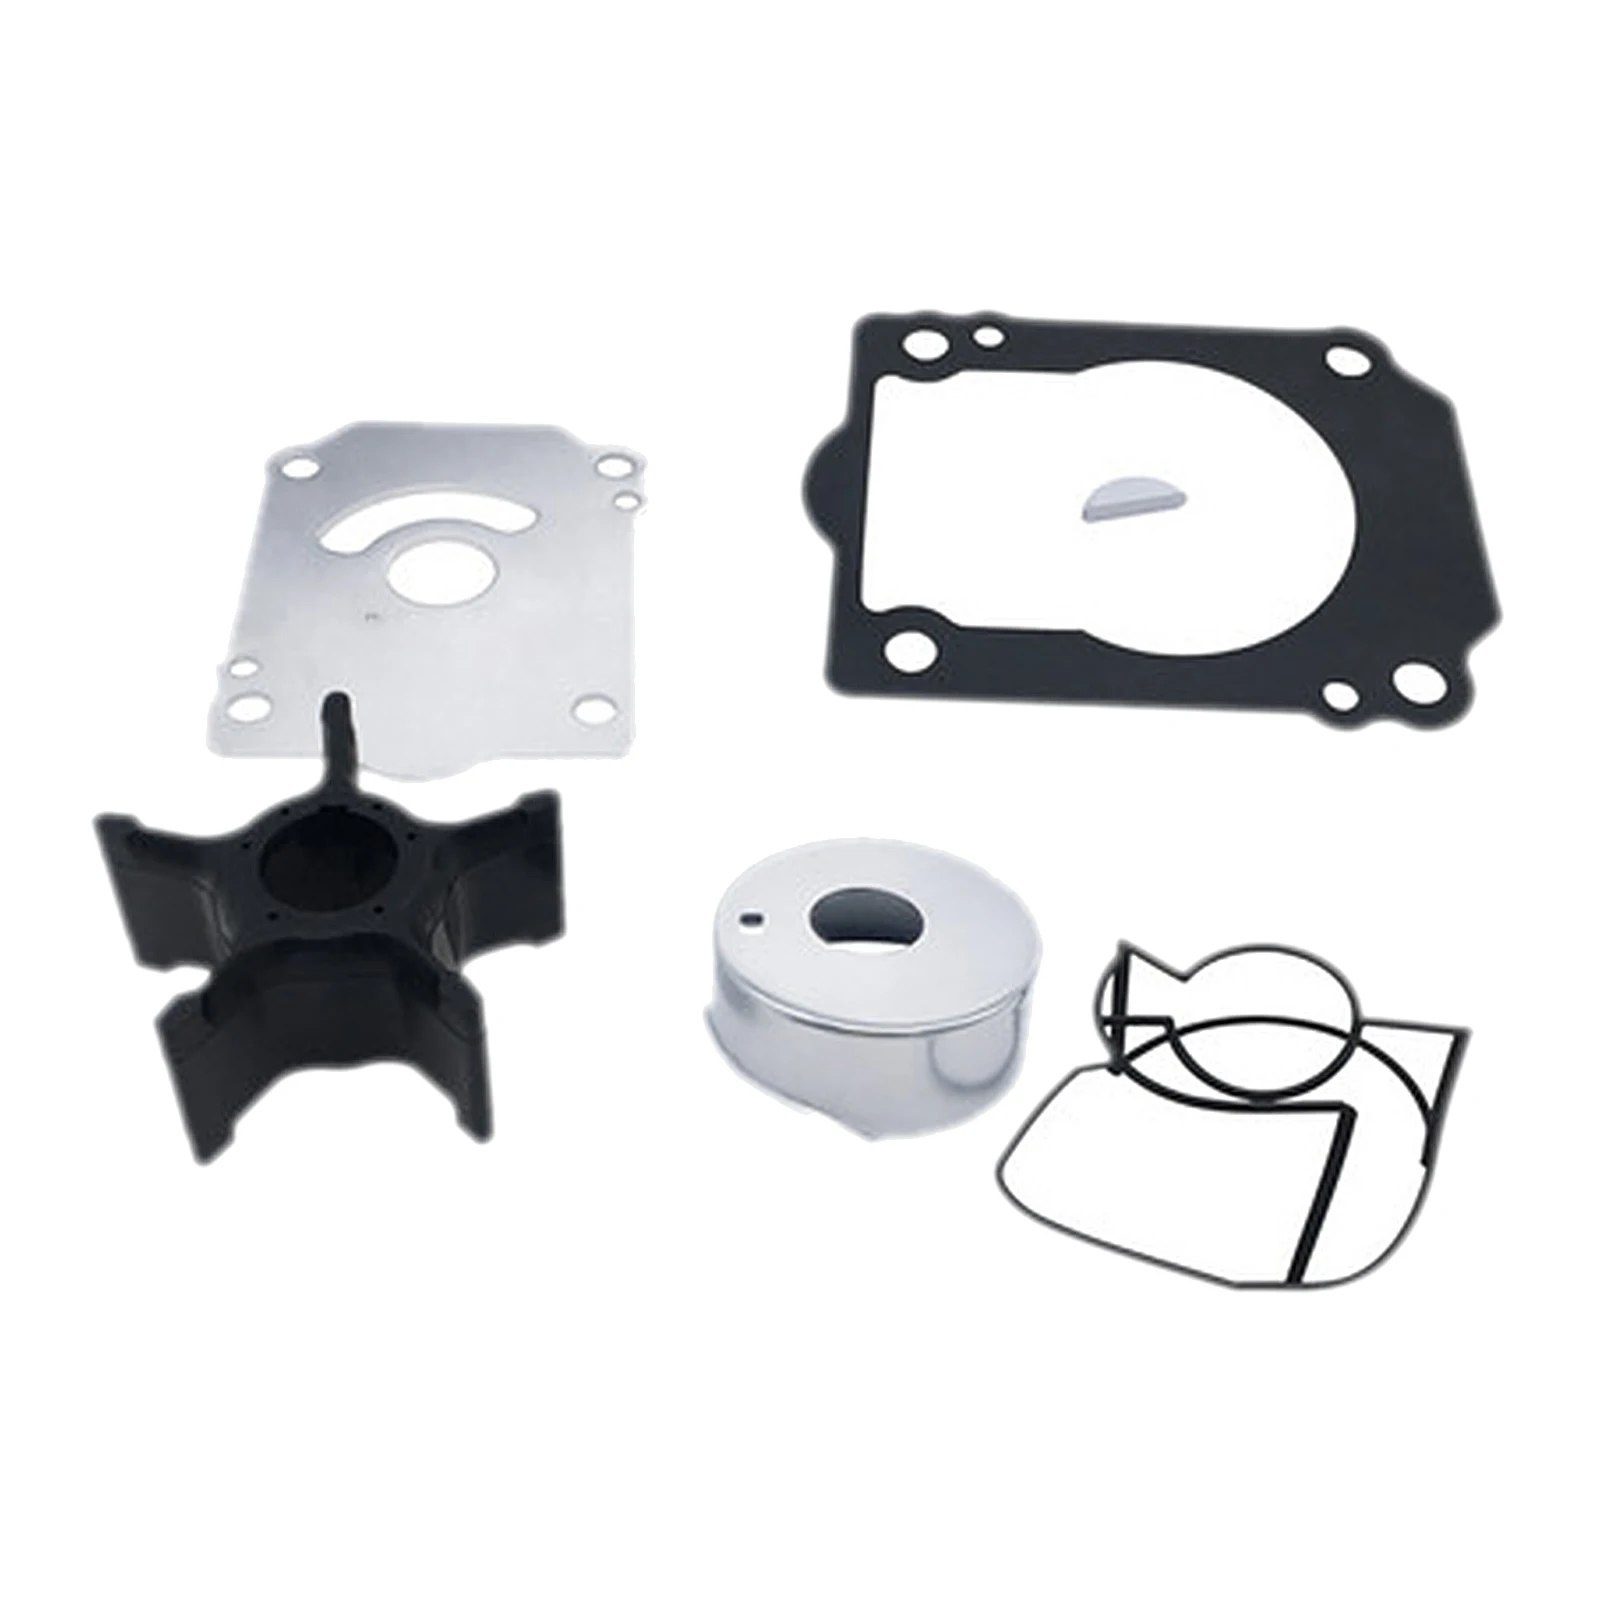 Water Pump Impeller Service Kit 17400-96J02 fits for Suzuki Outboards, Boat Motor Spare Parts High Reliability